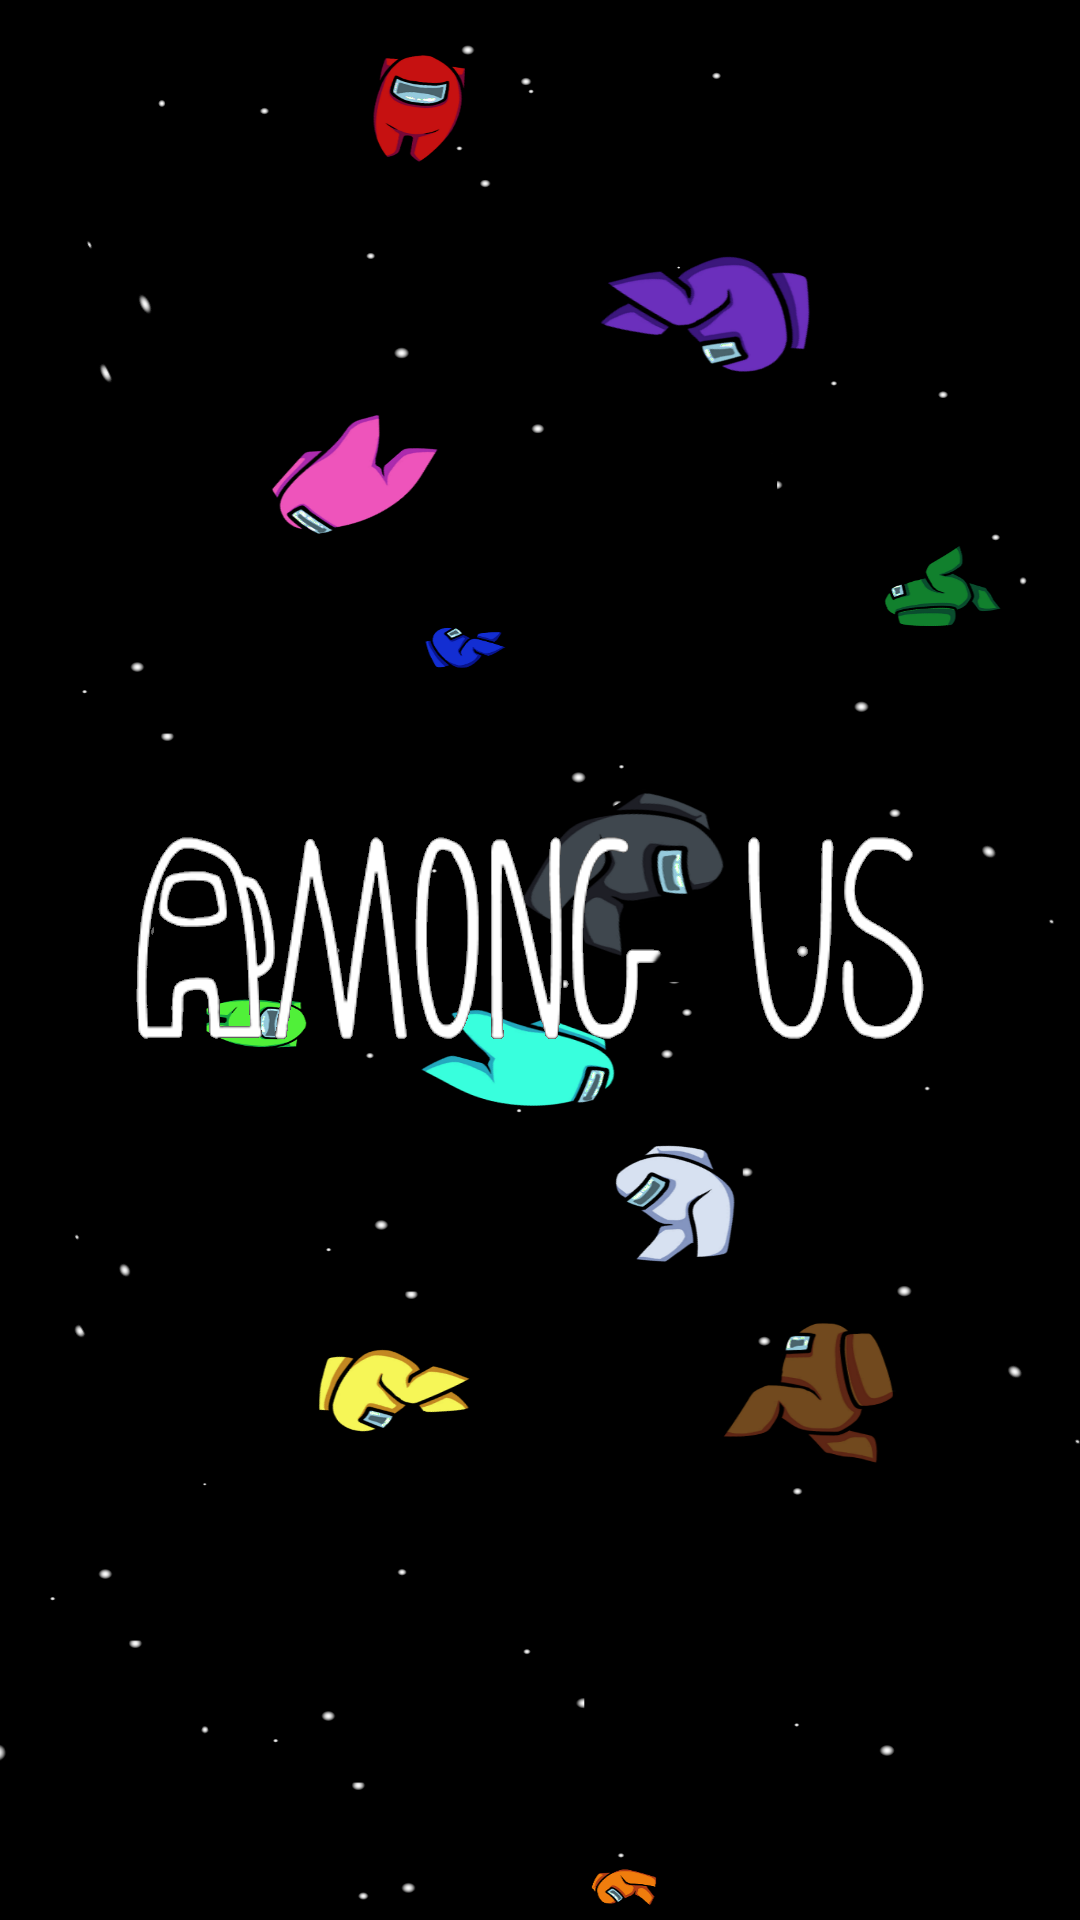 Made a phone wallpaper for Among Us! First time doing anything like this